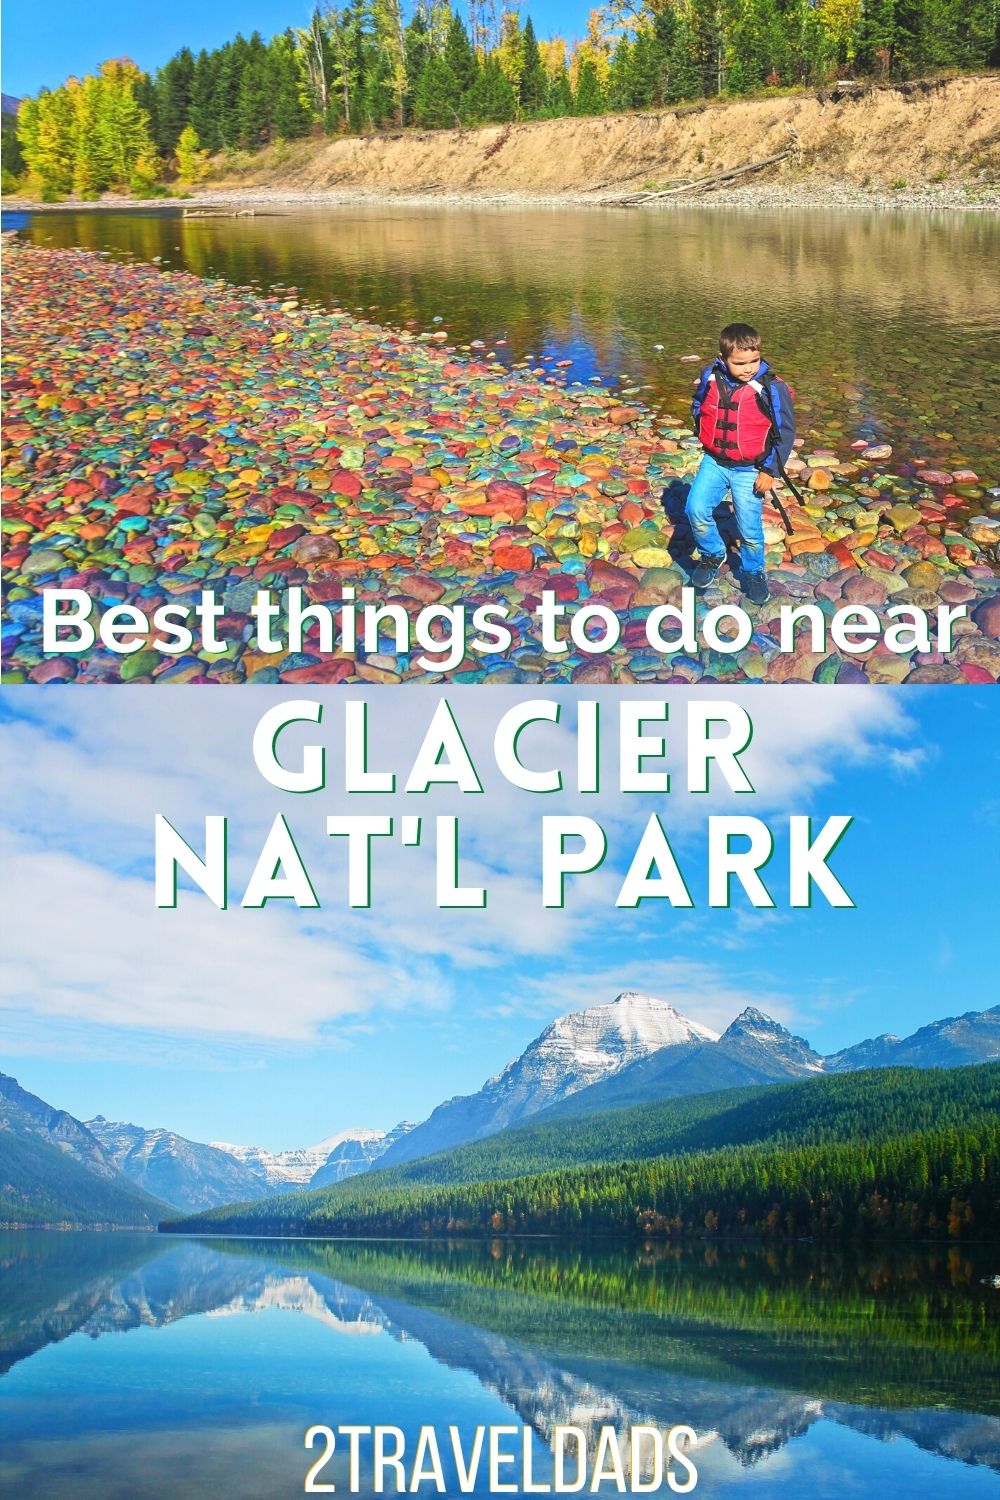 The best things to do near Glacier National Park include easy hikes, cool breweries and beautiful views in the National Forest. Top picks for activities near Glacier NP in any season.